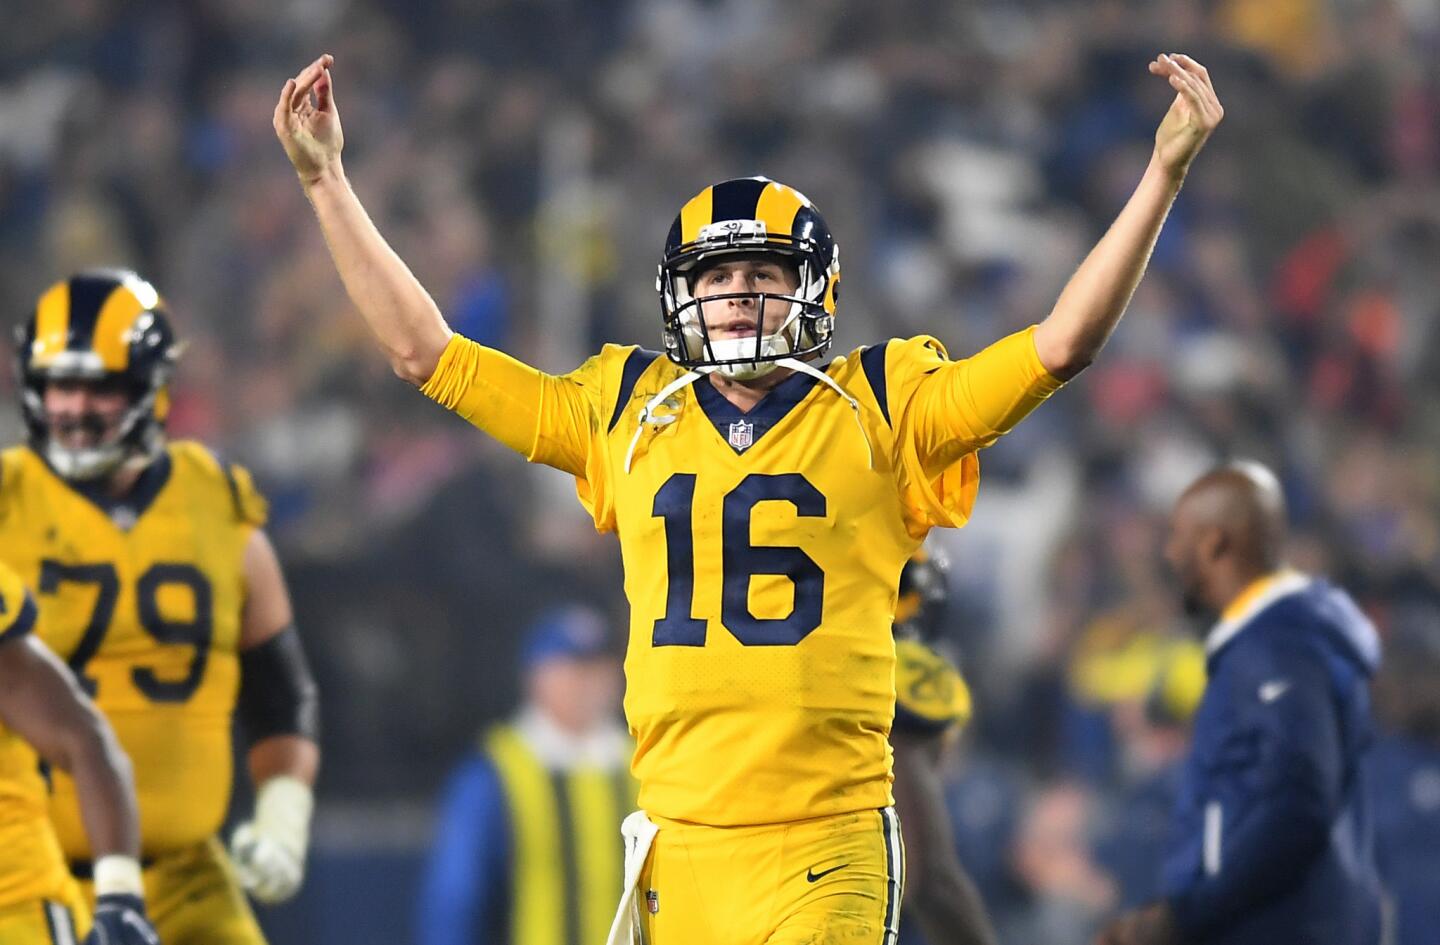 Rams quarterback Jared Goff celebrates at the end of the game Nov. 19 against the Chiefs at the Coliseum.